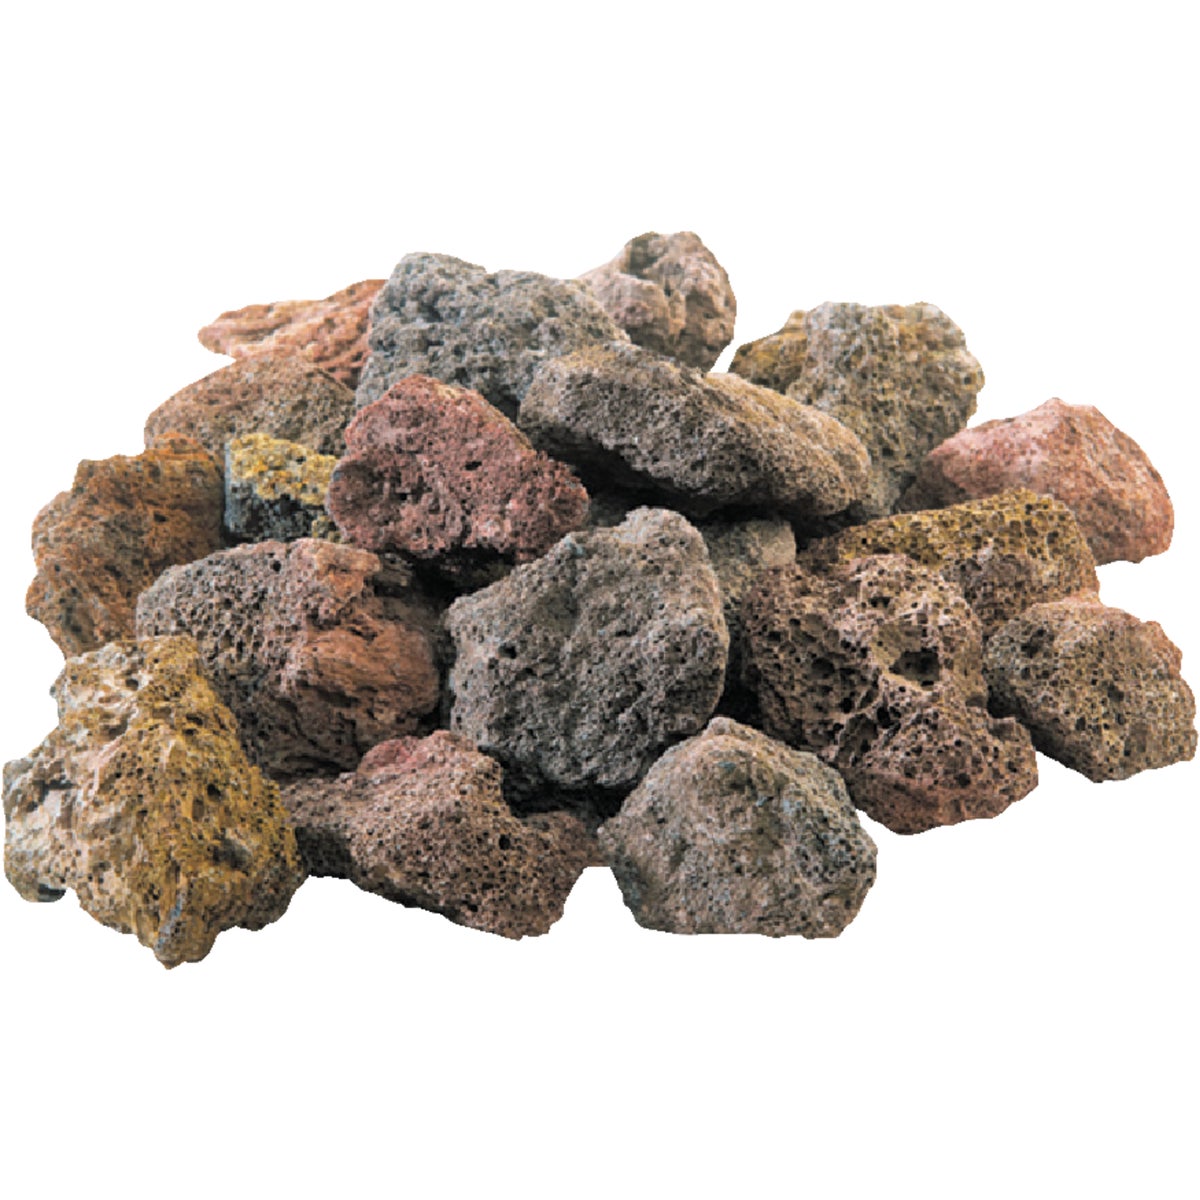 Item 826685, Replacement natural lava rocks distribute heat evenly for more flavorful 